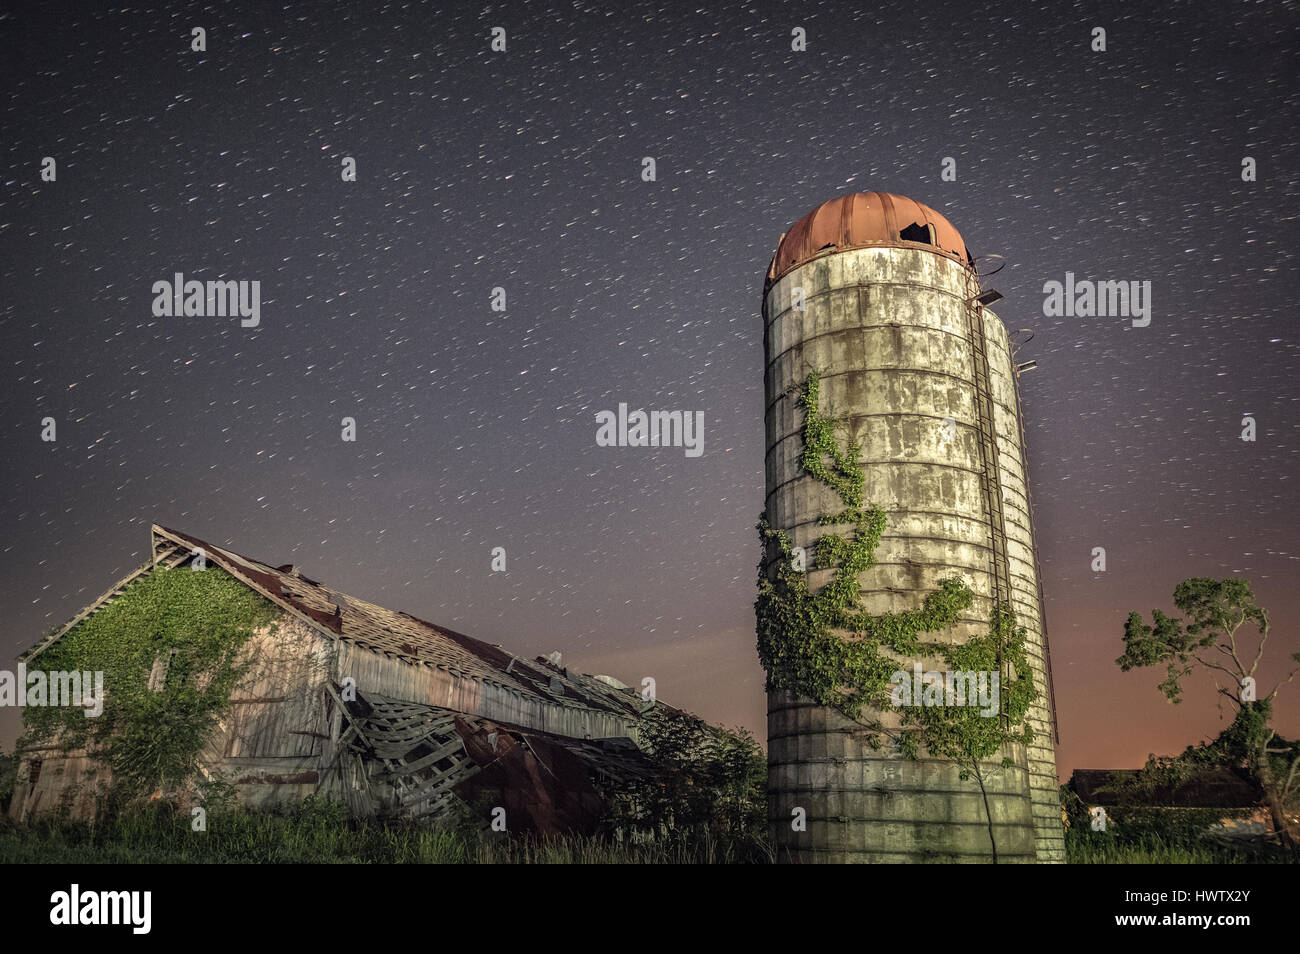 Among the encroaching environment, an old silo and barn stand in Mason County, West Virginia with a long exposure showing the movement of the stars. Stock Photo